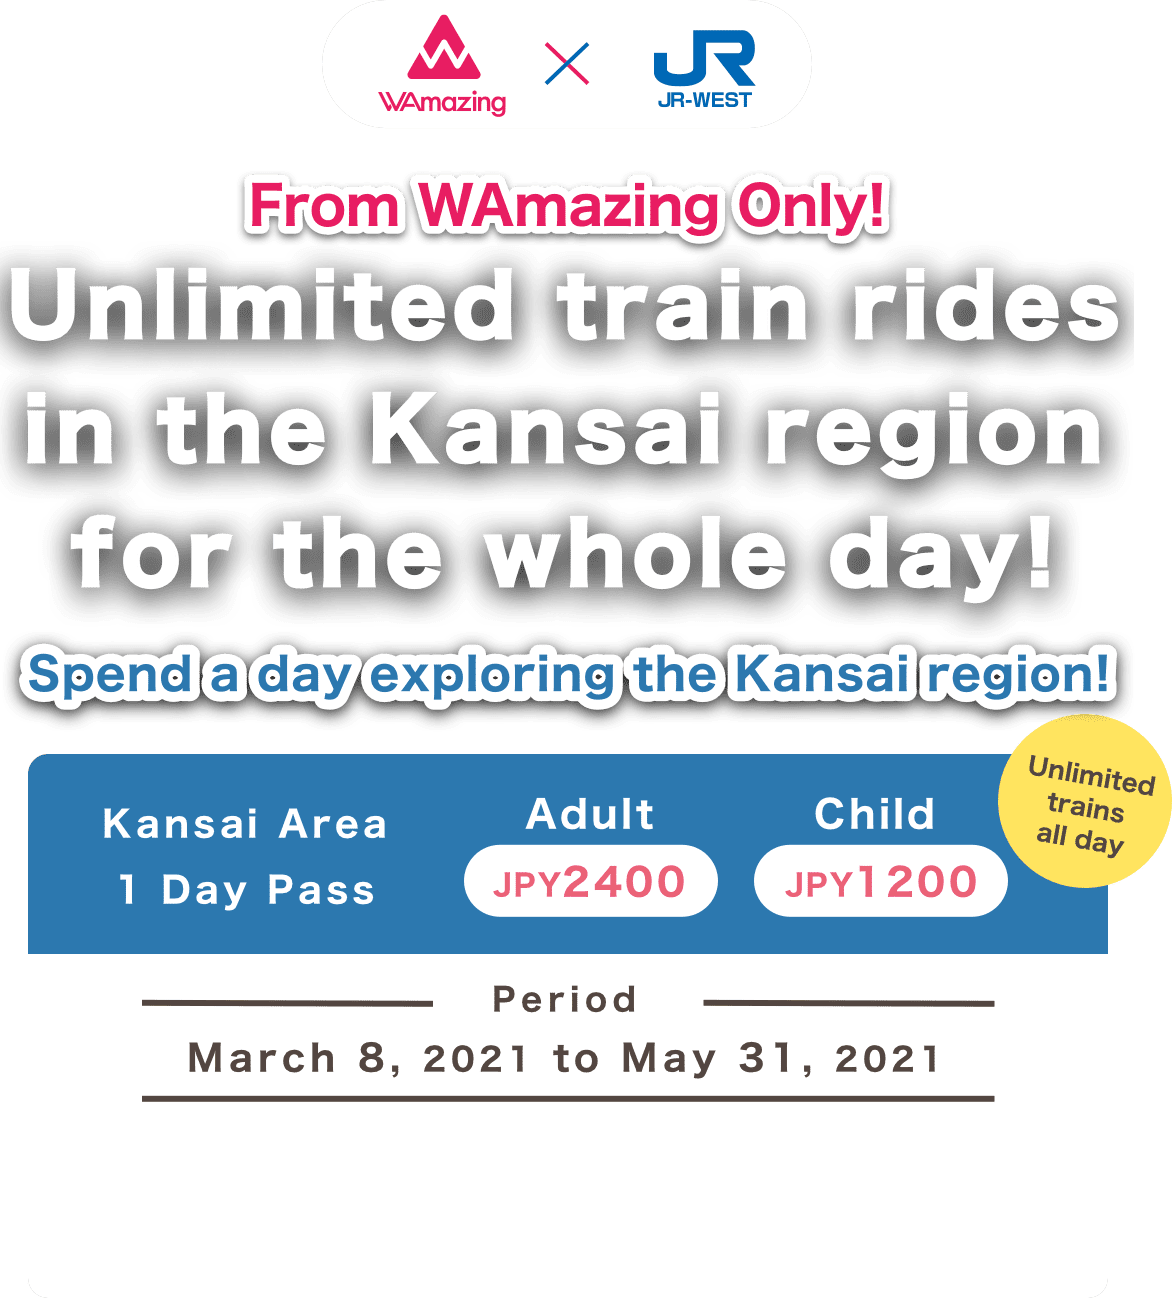 From WAmazing Only!
                      Unlimited train rides in the Kansai region for the whole day!